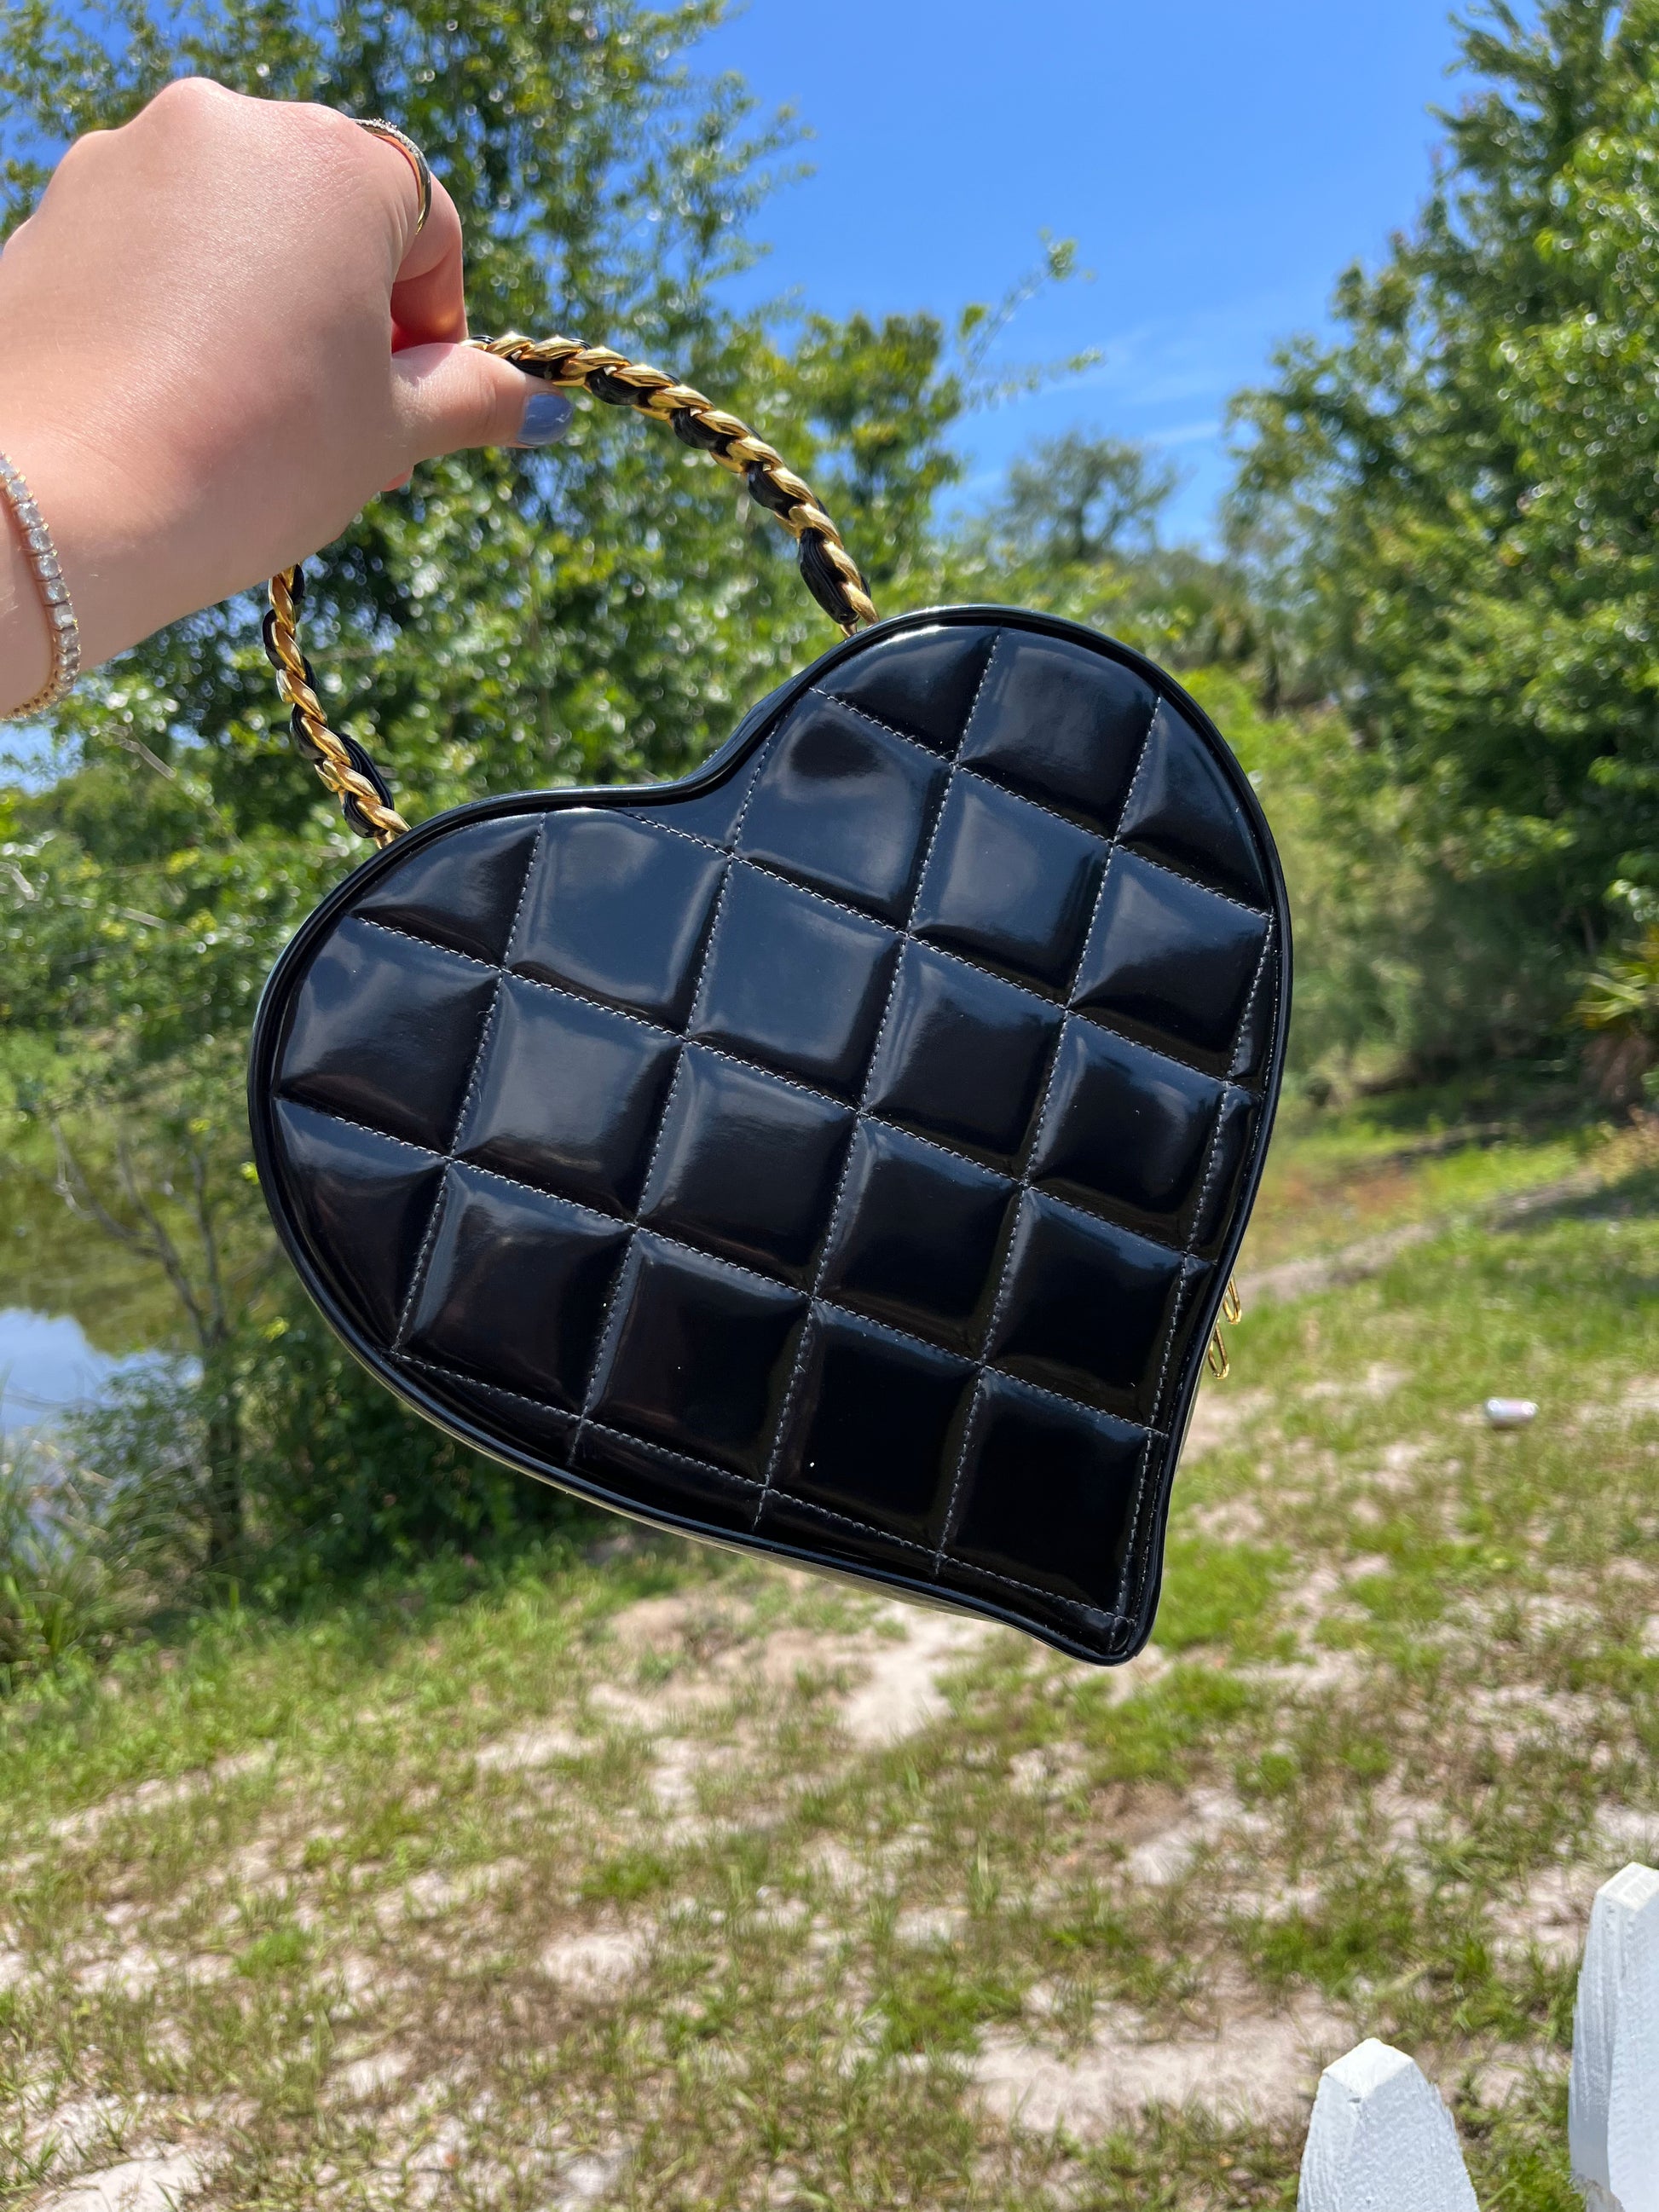 Chanel 1995 CC Heart Vanity Bag – Its A Luv Story